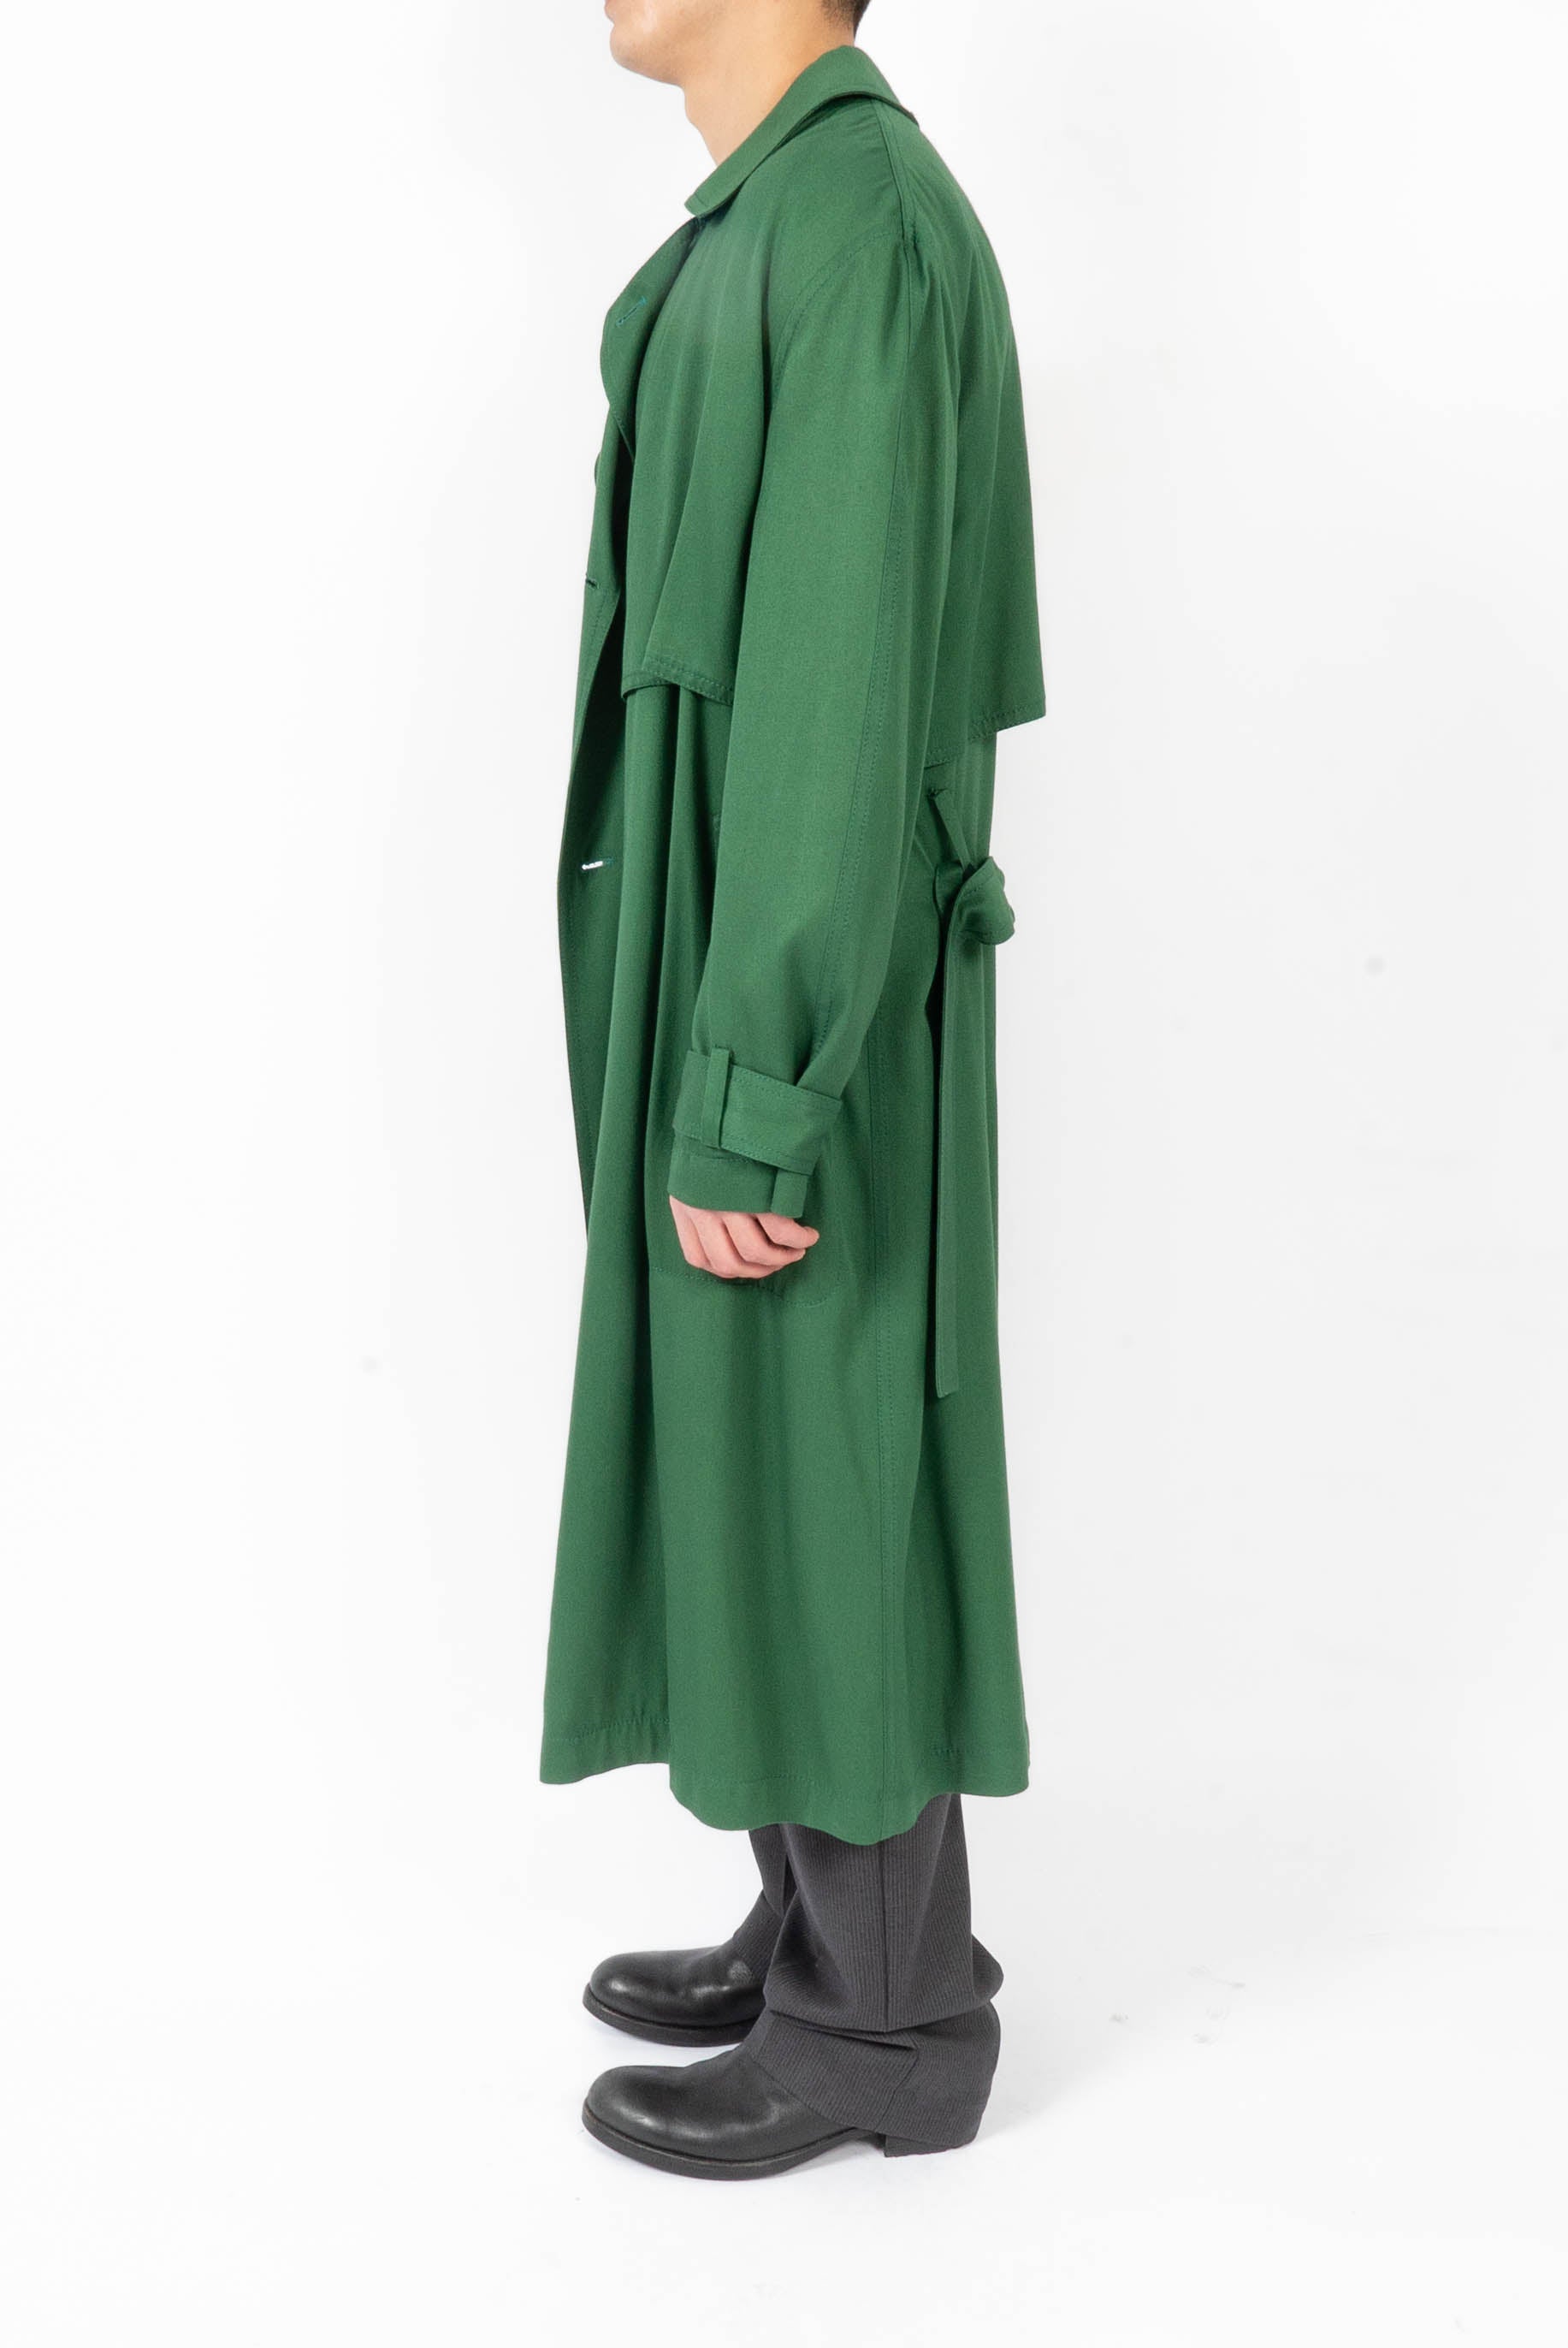 SS19 Bondi Green Double Breasted Trench Coat